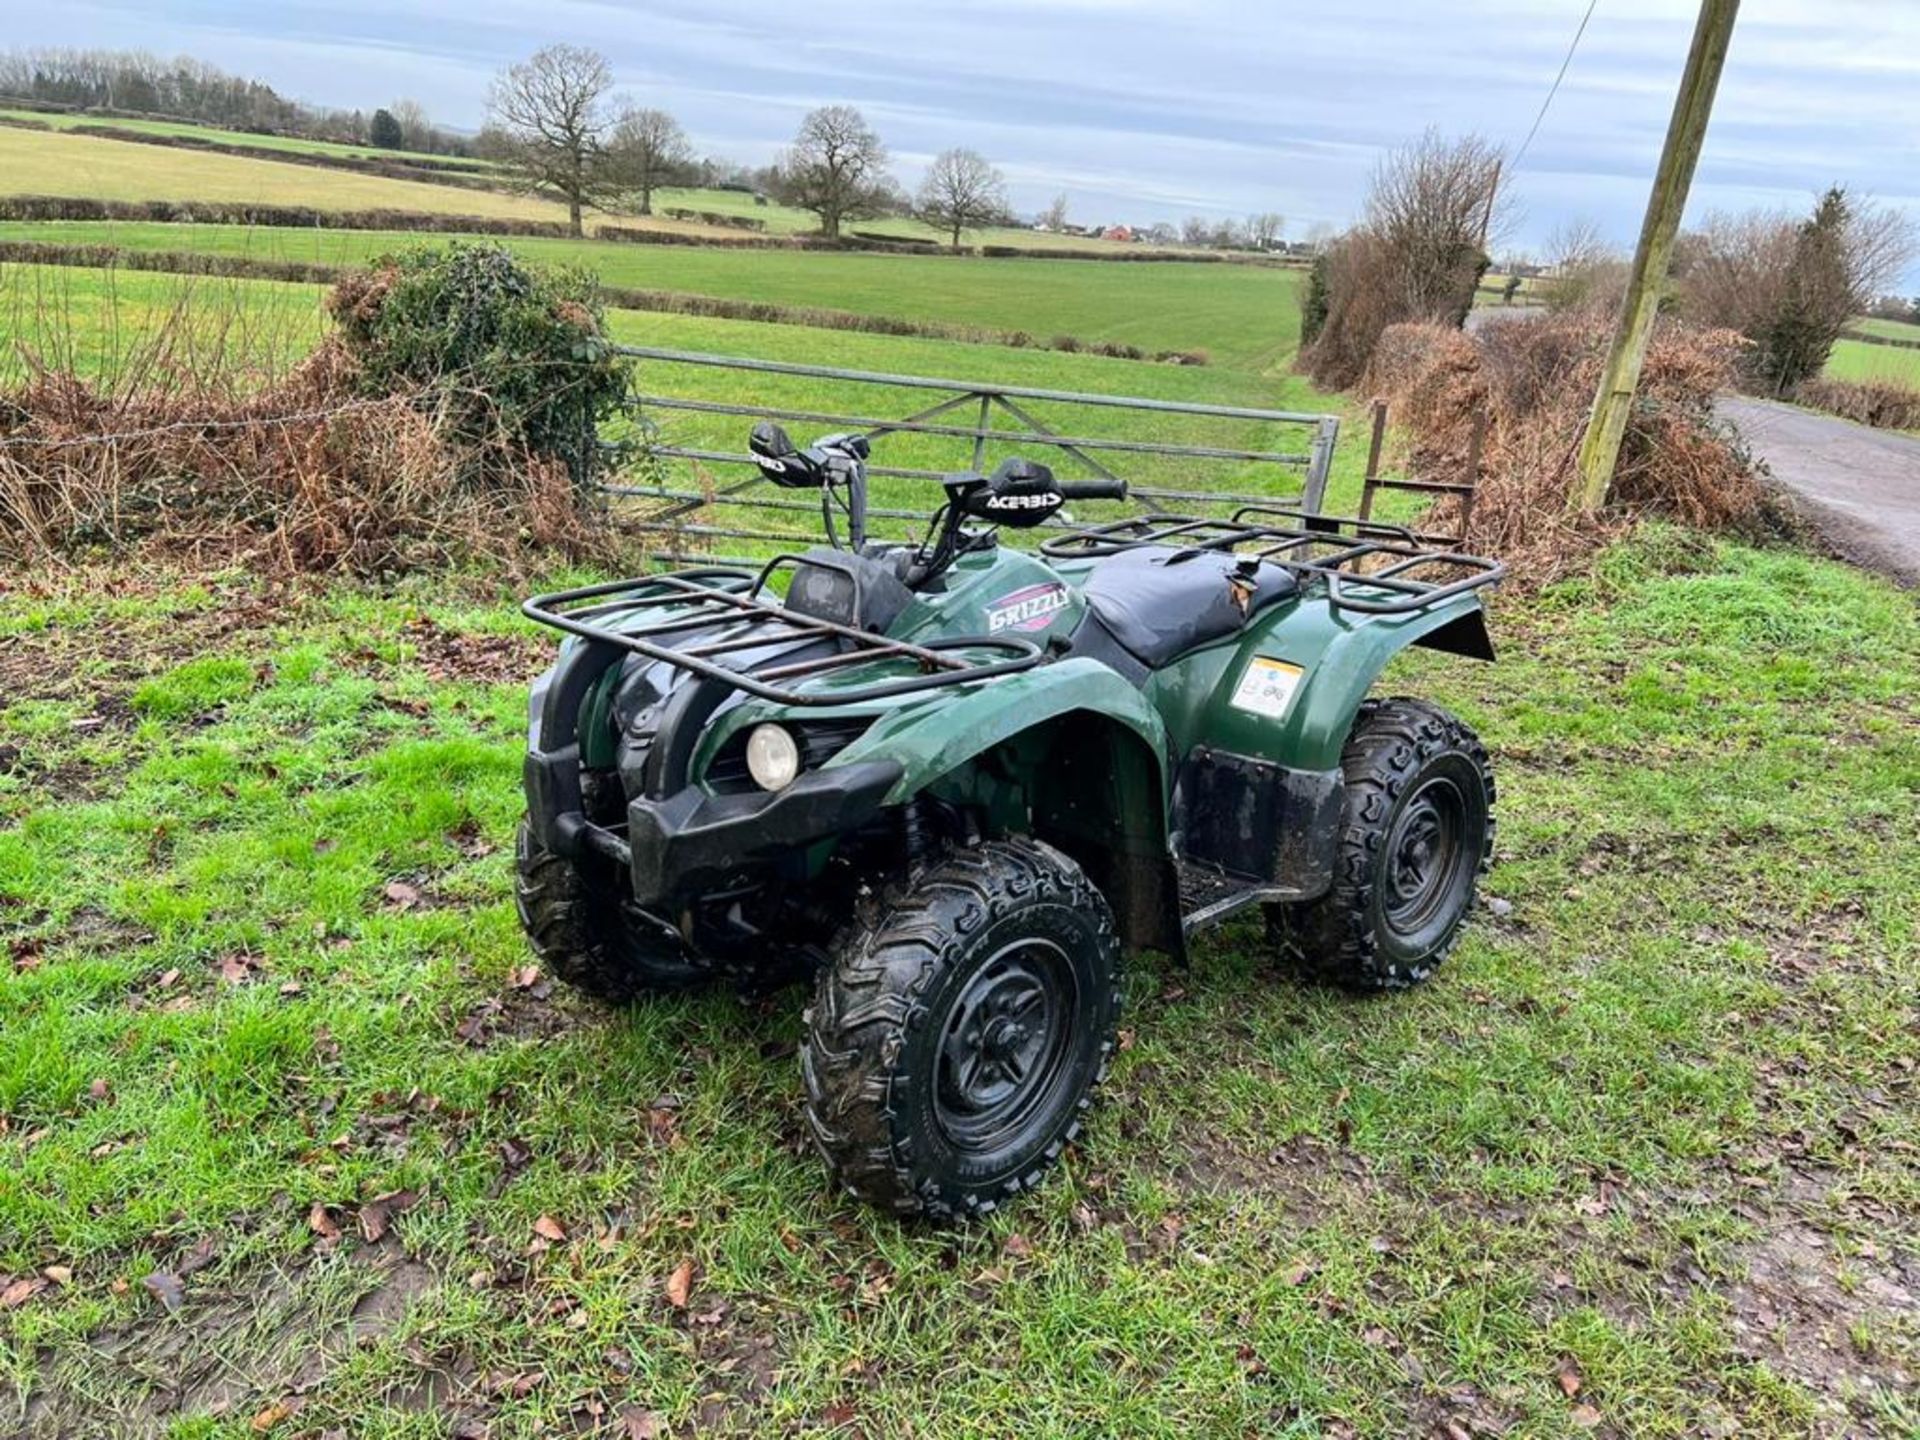 2012 YAMAHA GRIZZLY 450cc FARM QUAD, RUNS AND DRIVES WELL, AGRICULTURAL REGISTERED *NO VAT* - Image 3 of 11